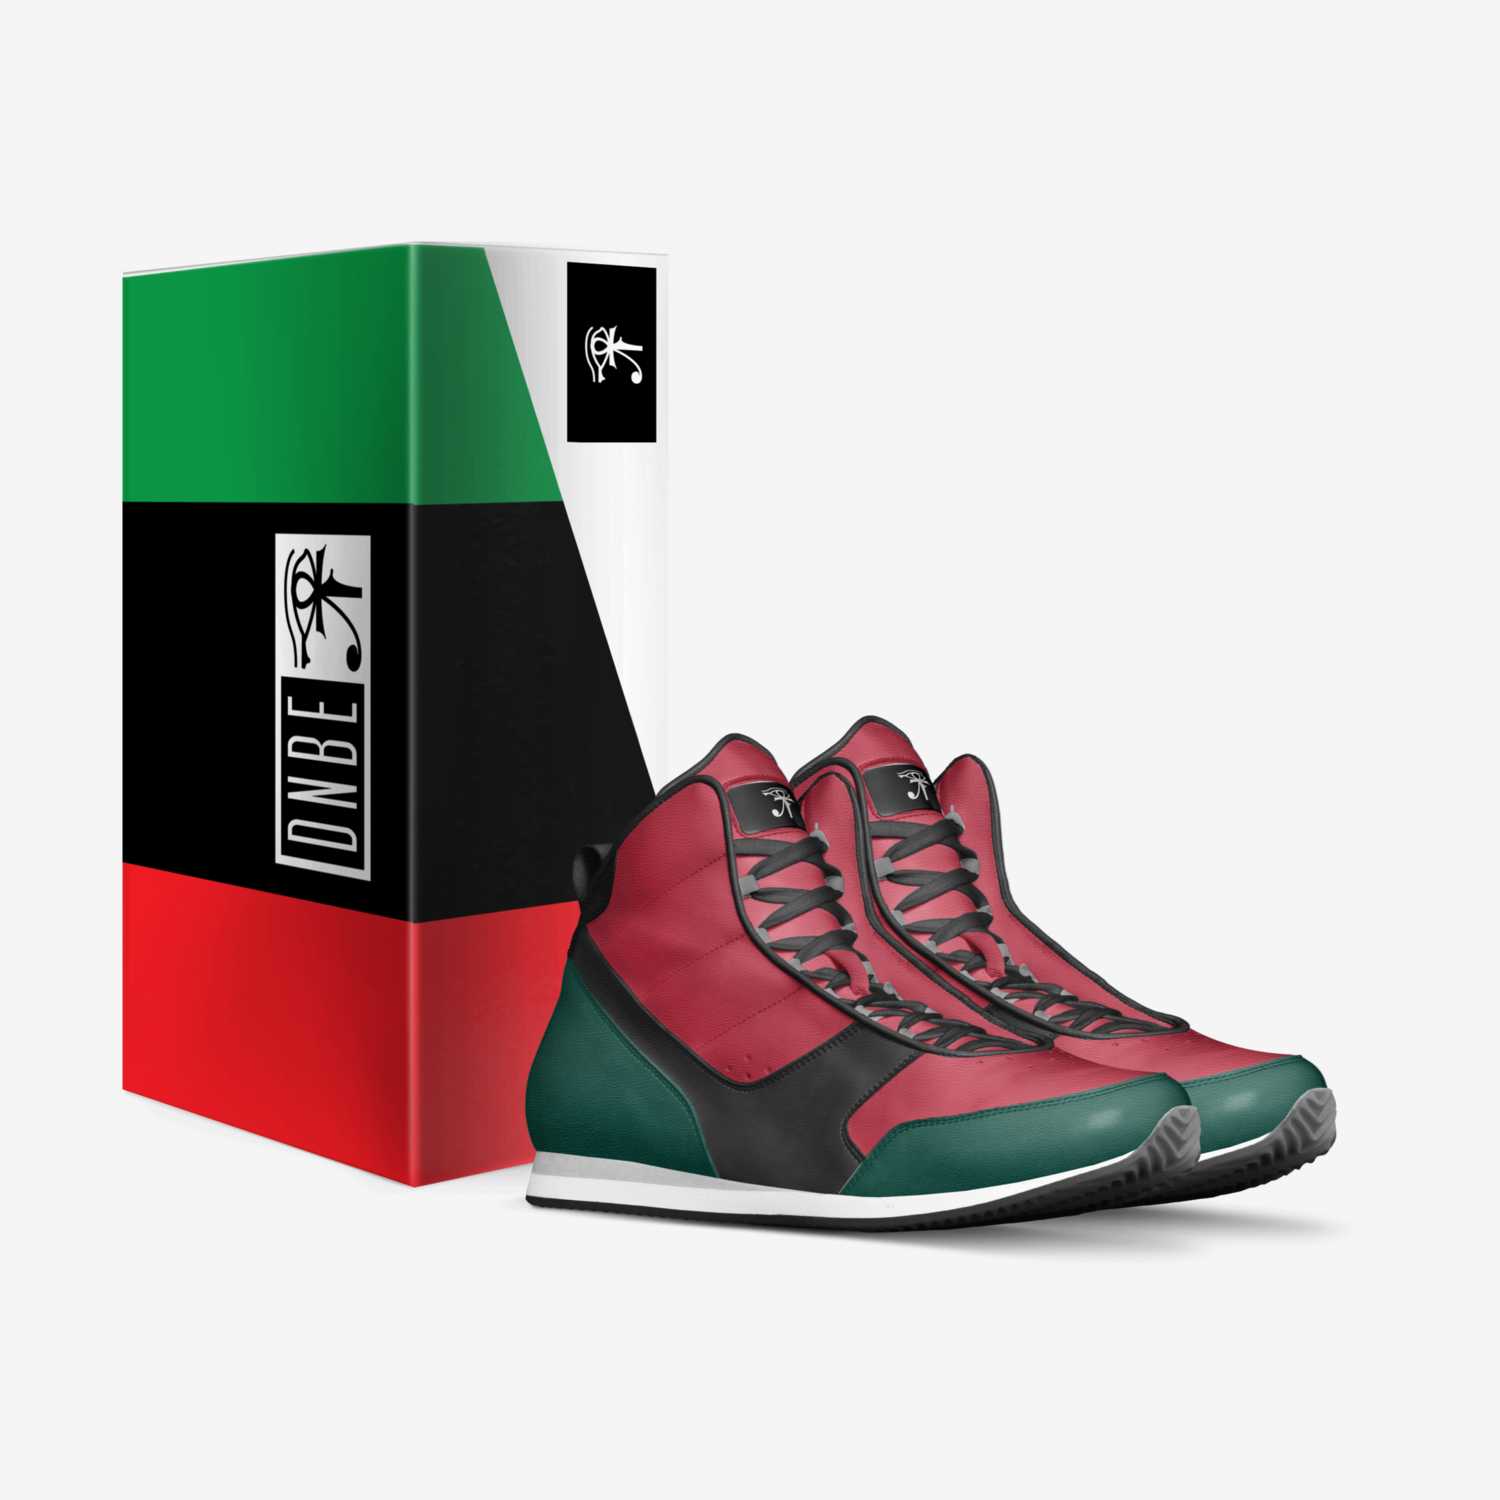 Hoop Dream - rbg custom made in Italy shoes by Dnbe Apparel | Box view